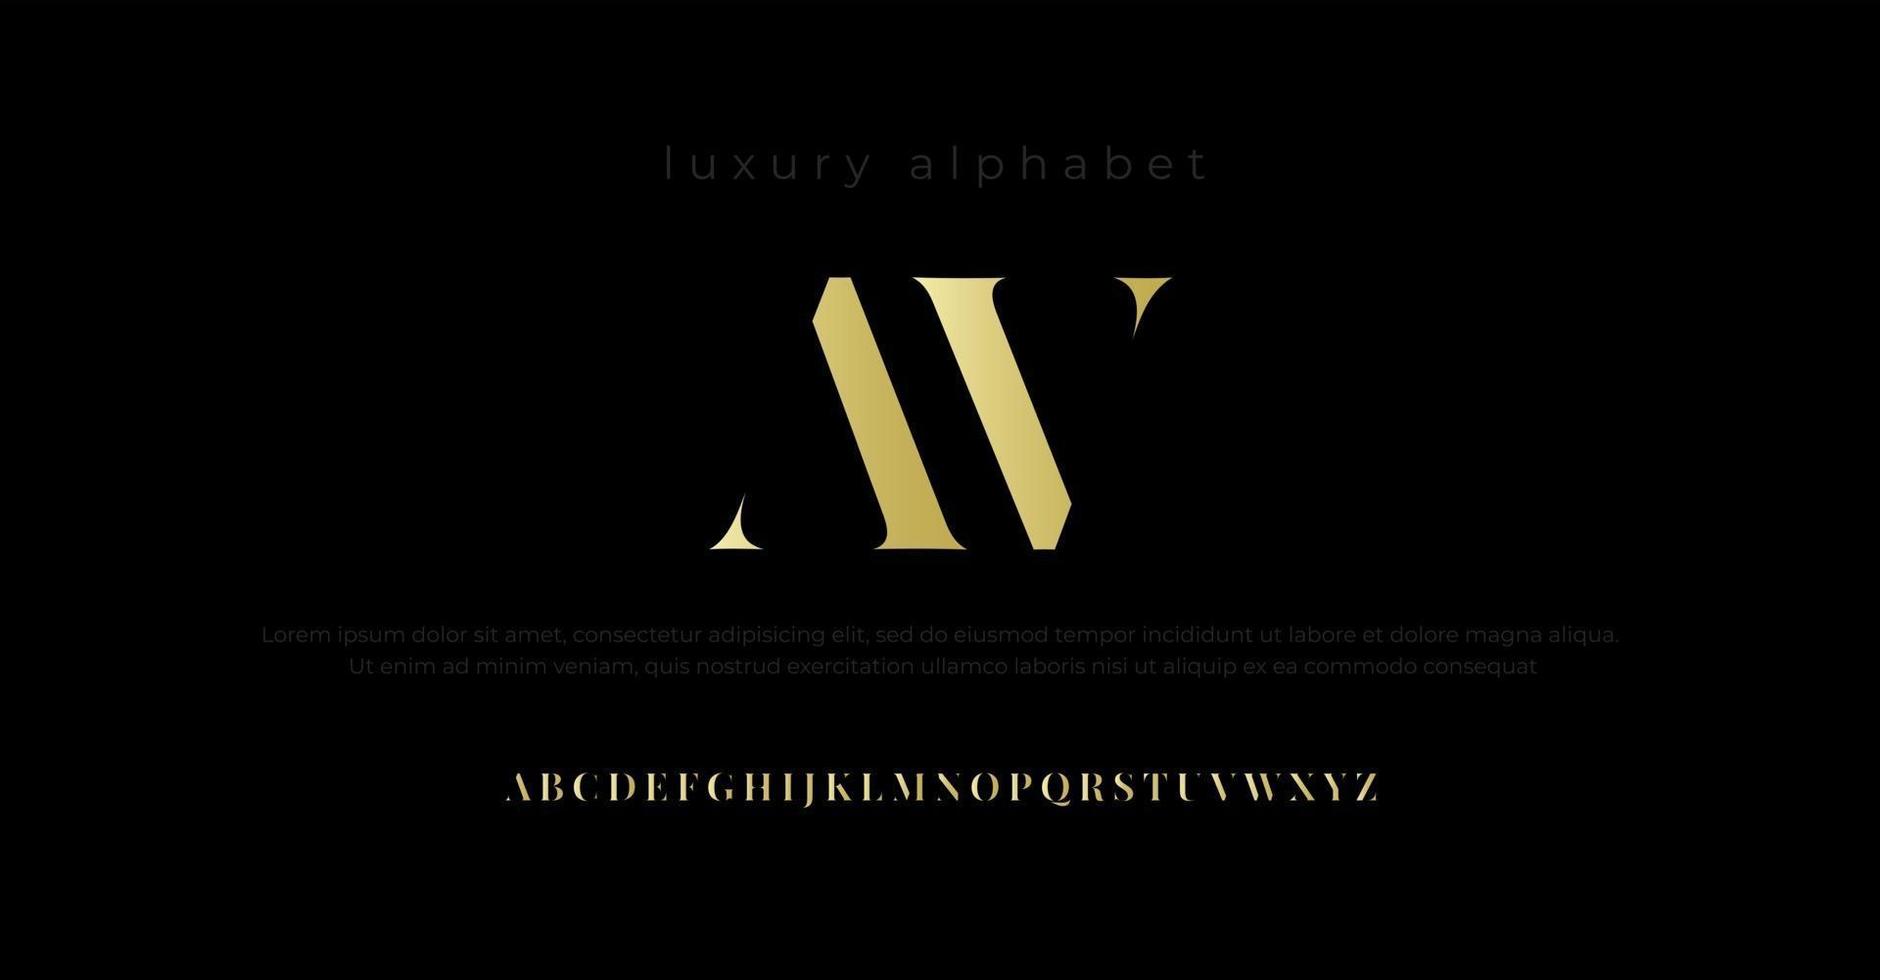 Future luxury alphabet font. Typography urban style fonts for fashion, retail, feminine, beauty care, jewelry logo design vector